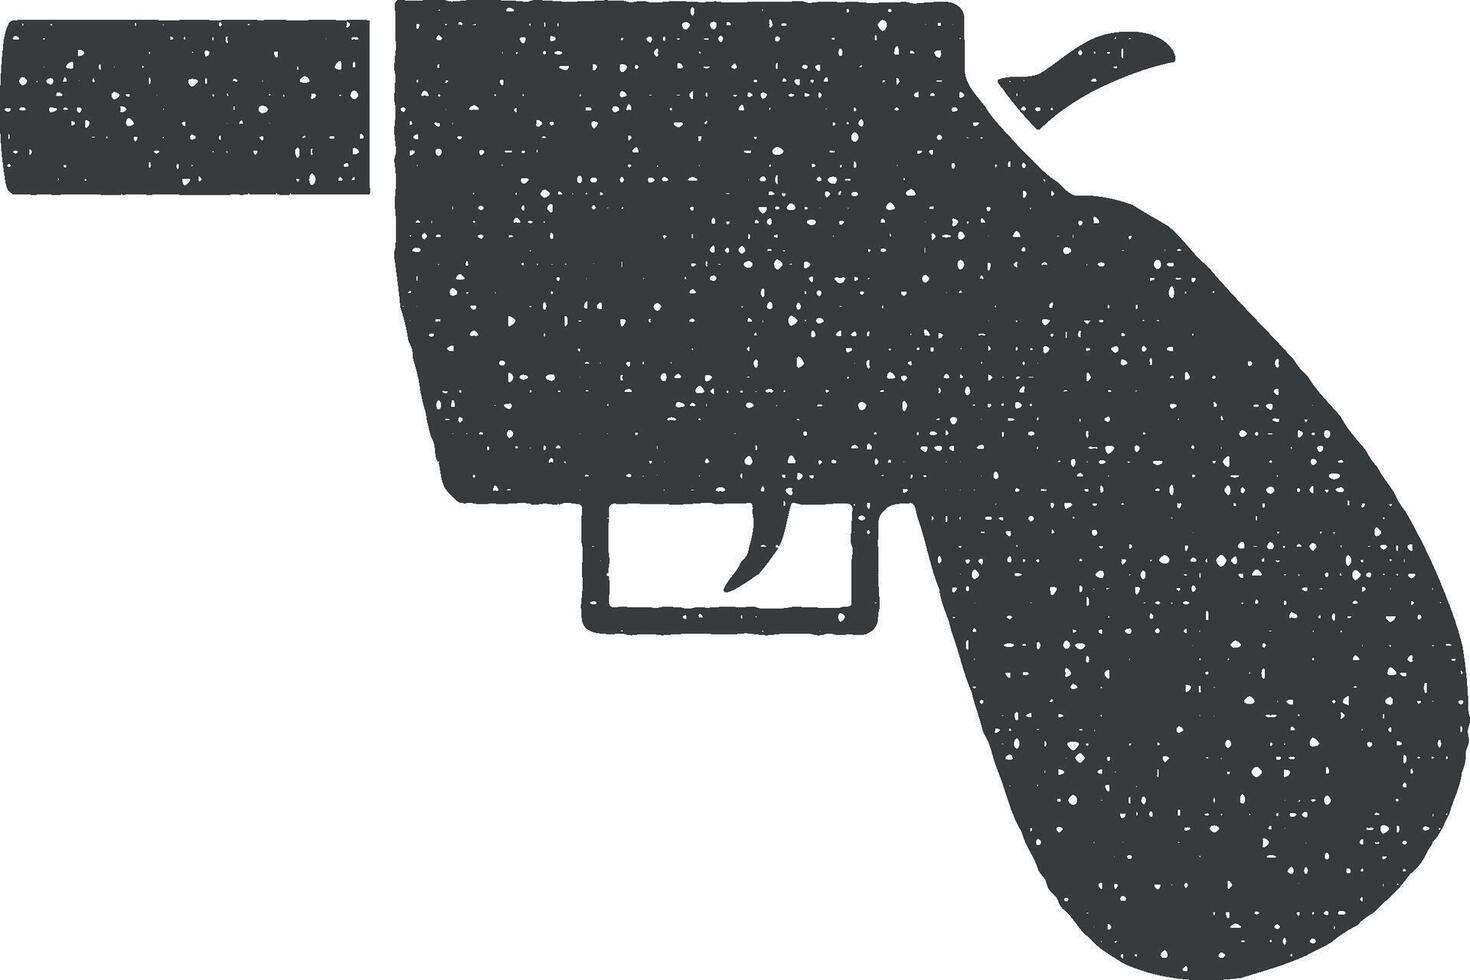 revolver vector icon illustration with stamp effect